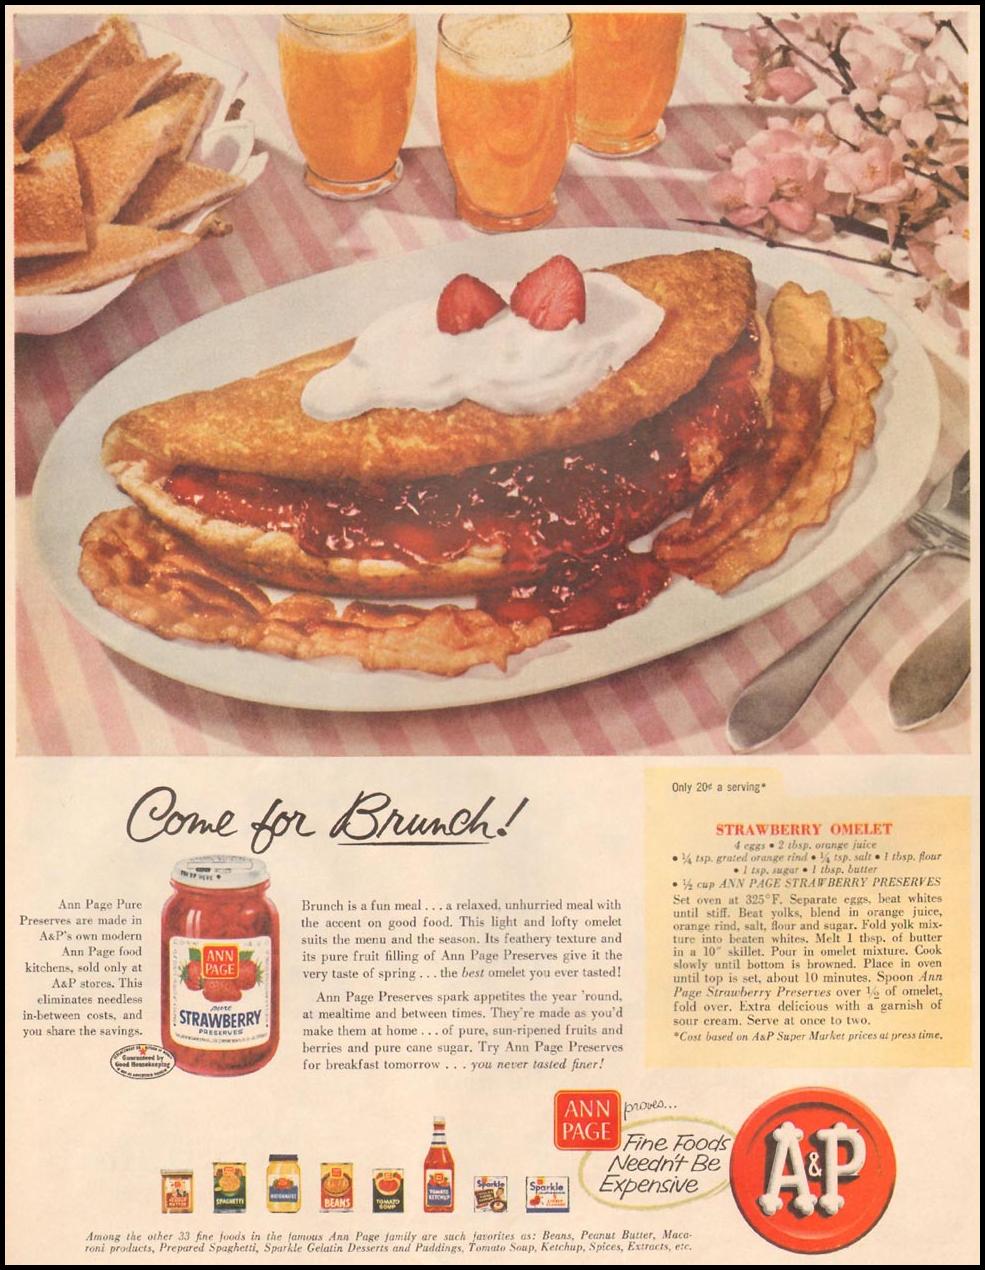 ANN PAGE FOODS
LIFE
04/01/1957
p. 94